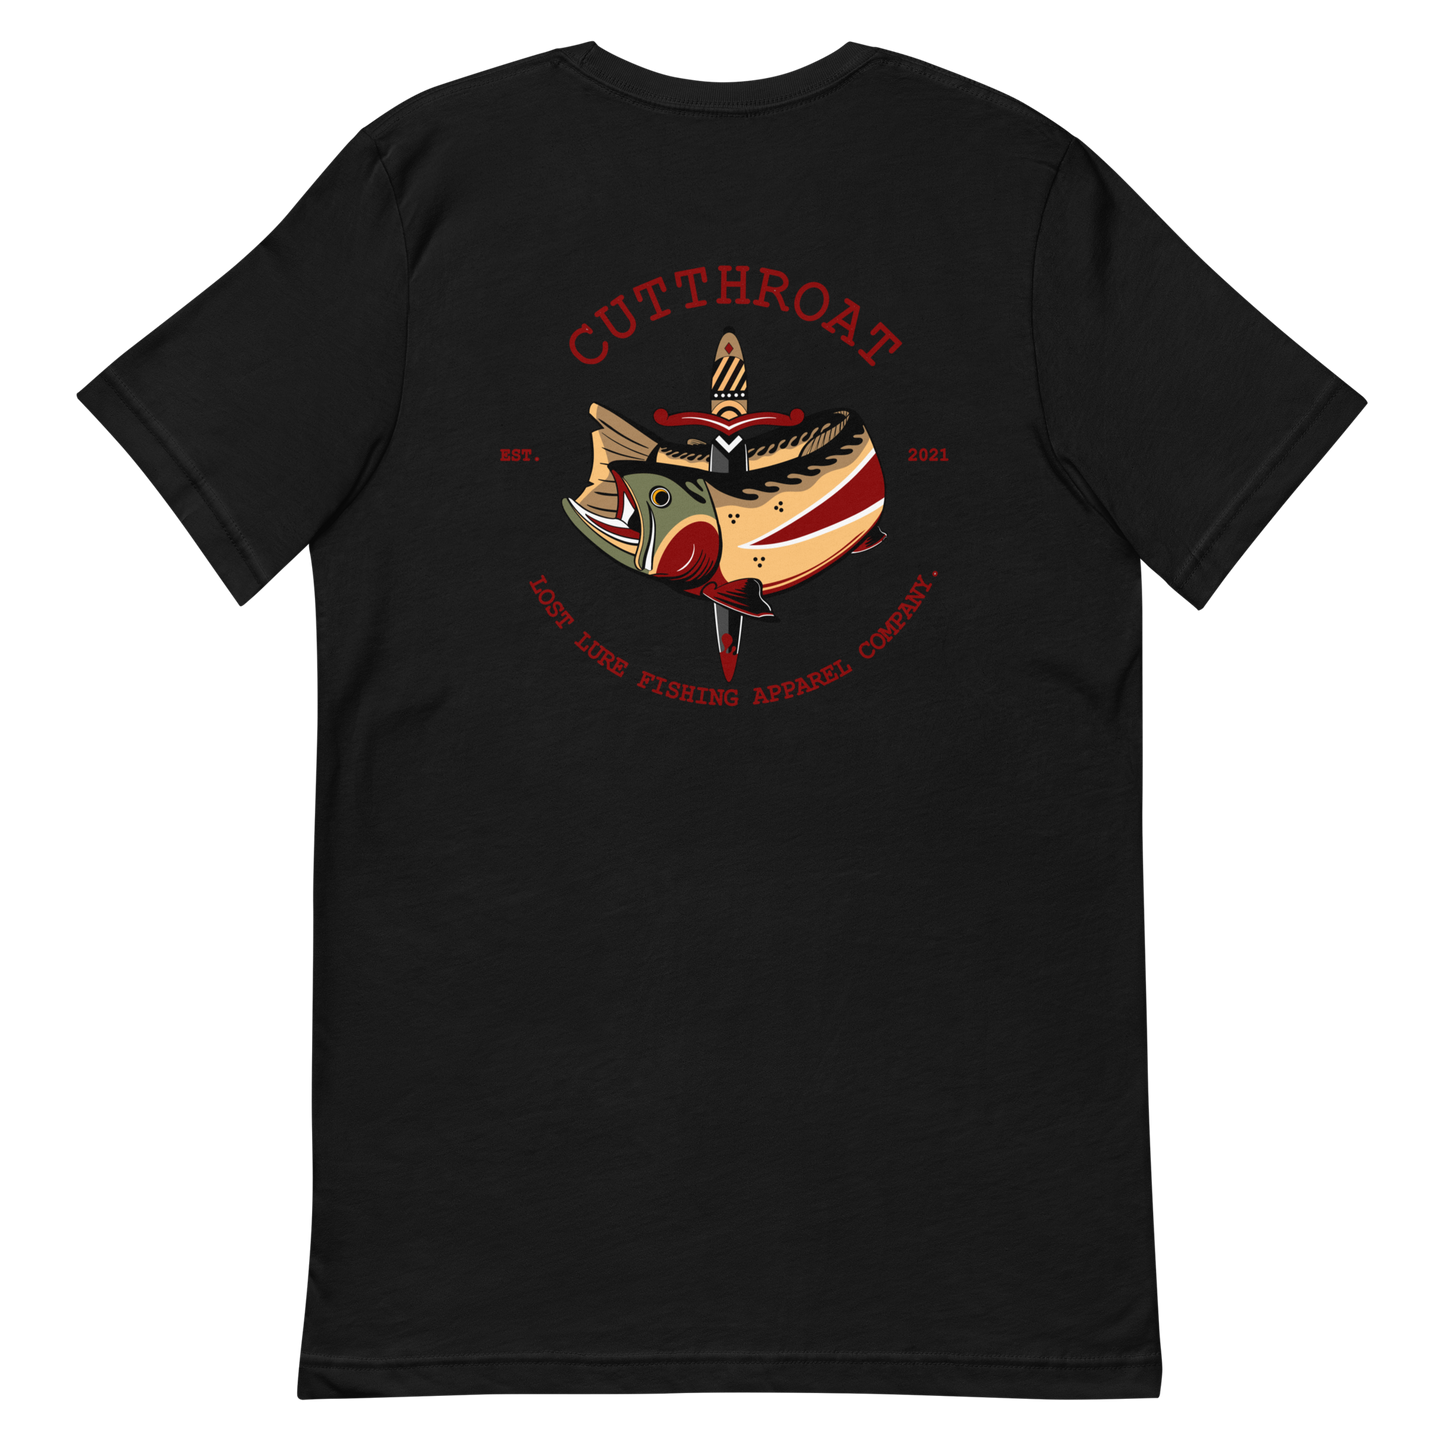 Cutthroat Trout fishing shirt. It’s an American traditional style design with a cutthroat trout and a dagger. The shirt reads Cutthroat trout, est. 2021, lost lure fishing apparel company. The front of the shirt has the lost lure logo. Dark grey fishing shirt, back side